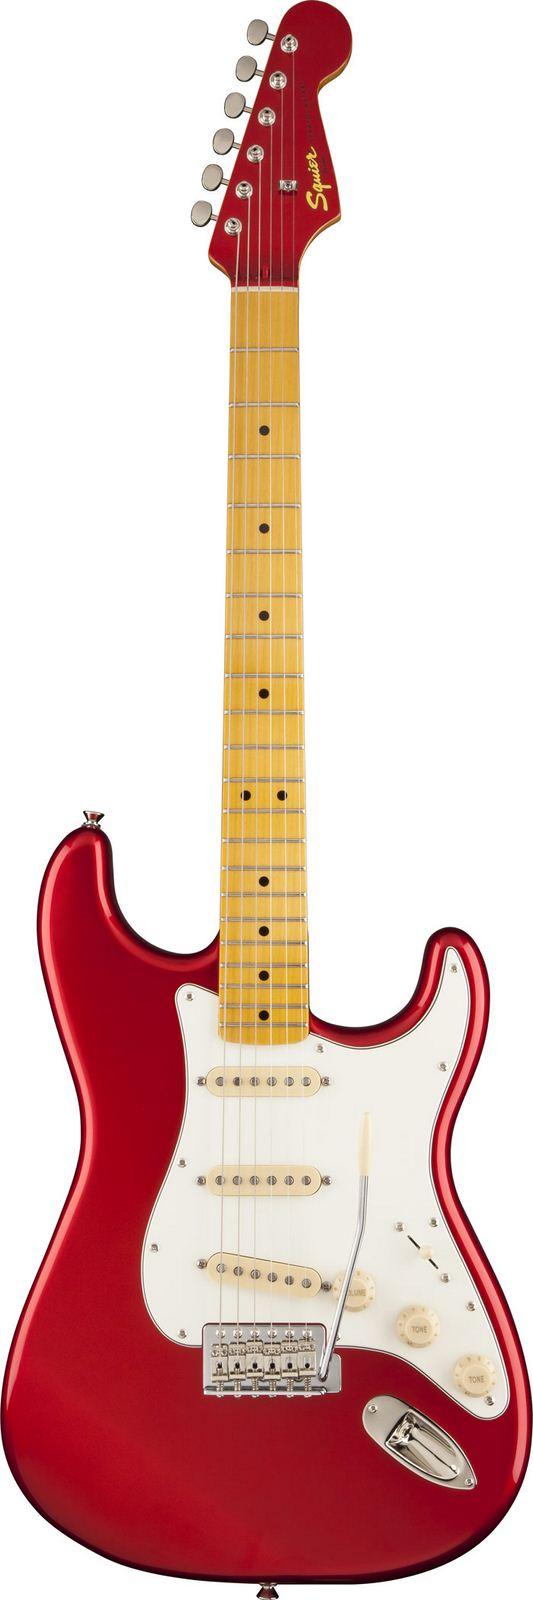 Foto Squier Classic Vibe 50S Stratocaster Maple Fingerboard Candy Apple Red foto 556379